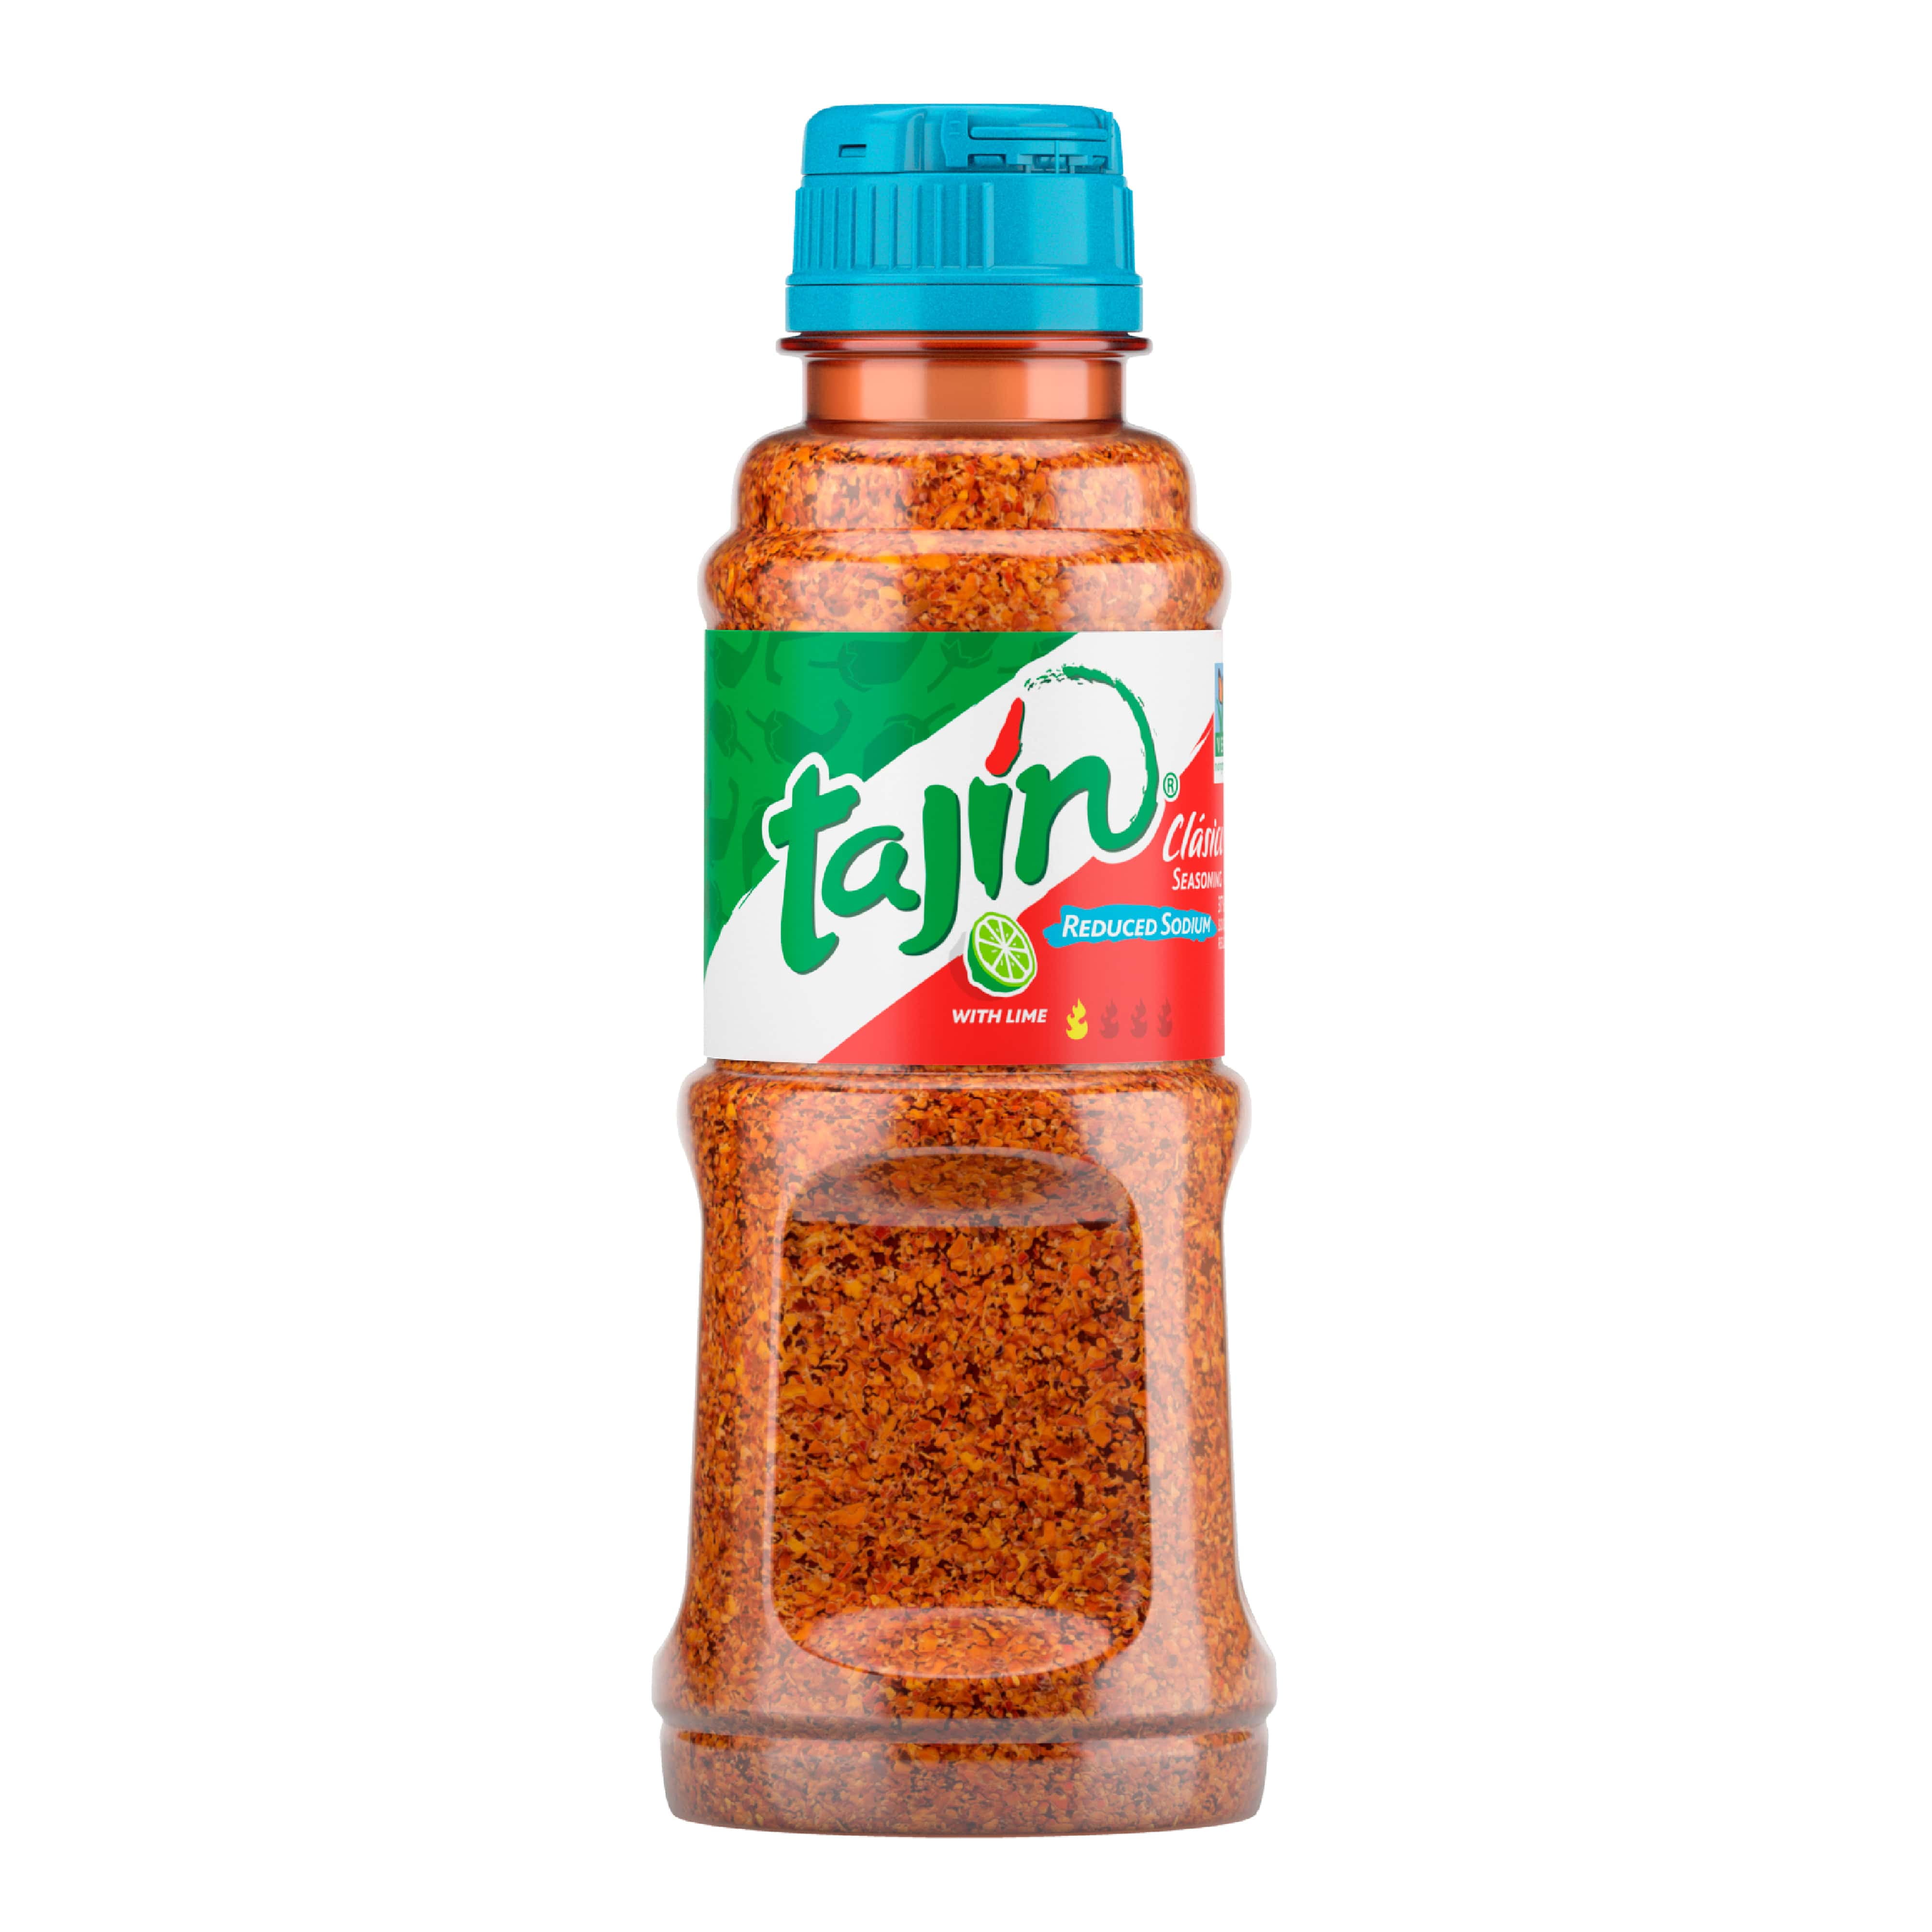 What Is Tajin Seasoning and Is There Anything I Can't Use It On?